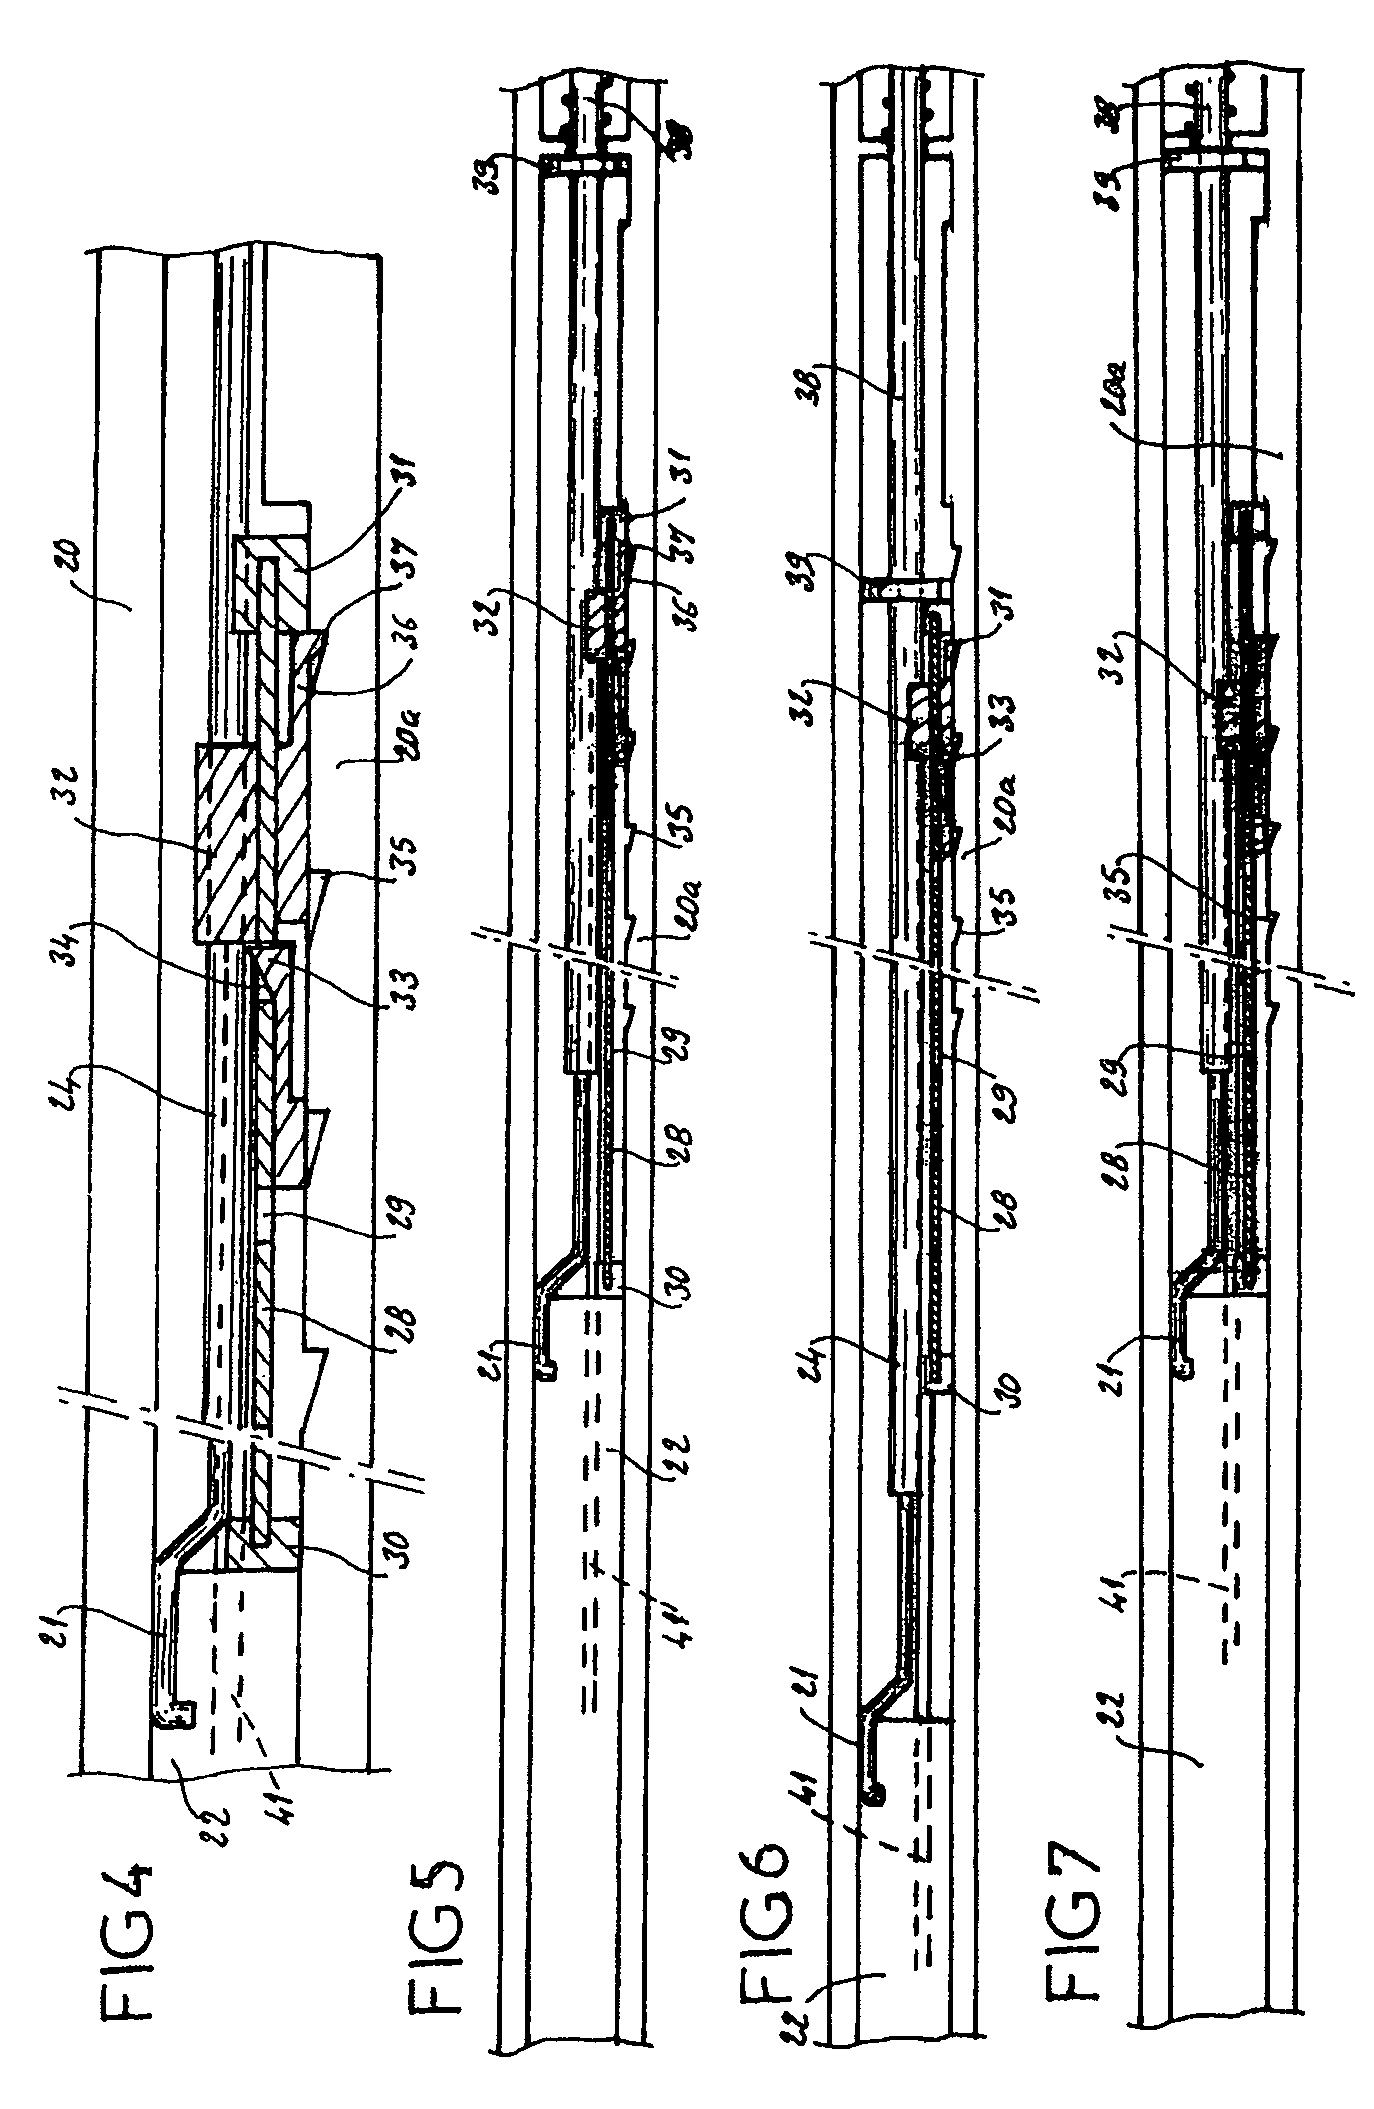 Appliance for storing, distributing and placing surgical fasteners